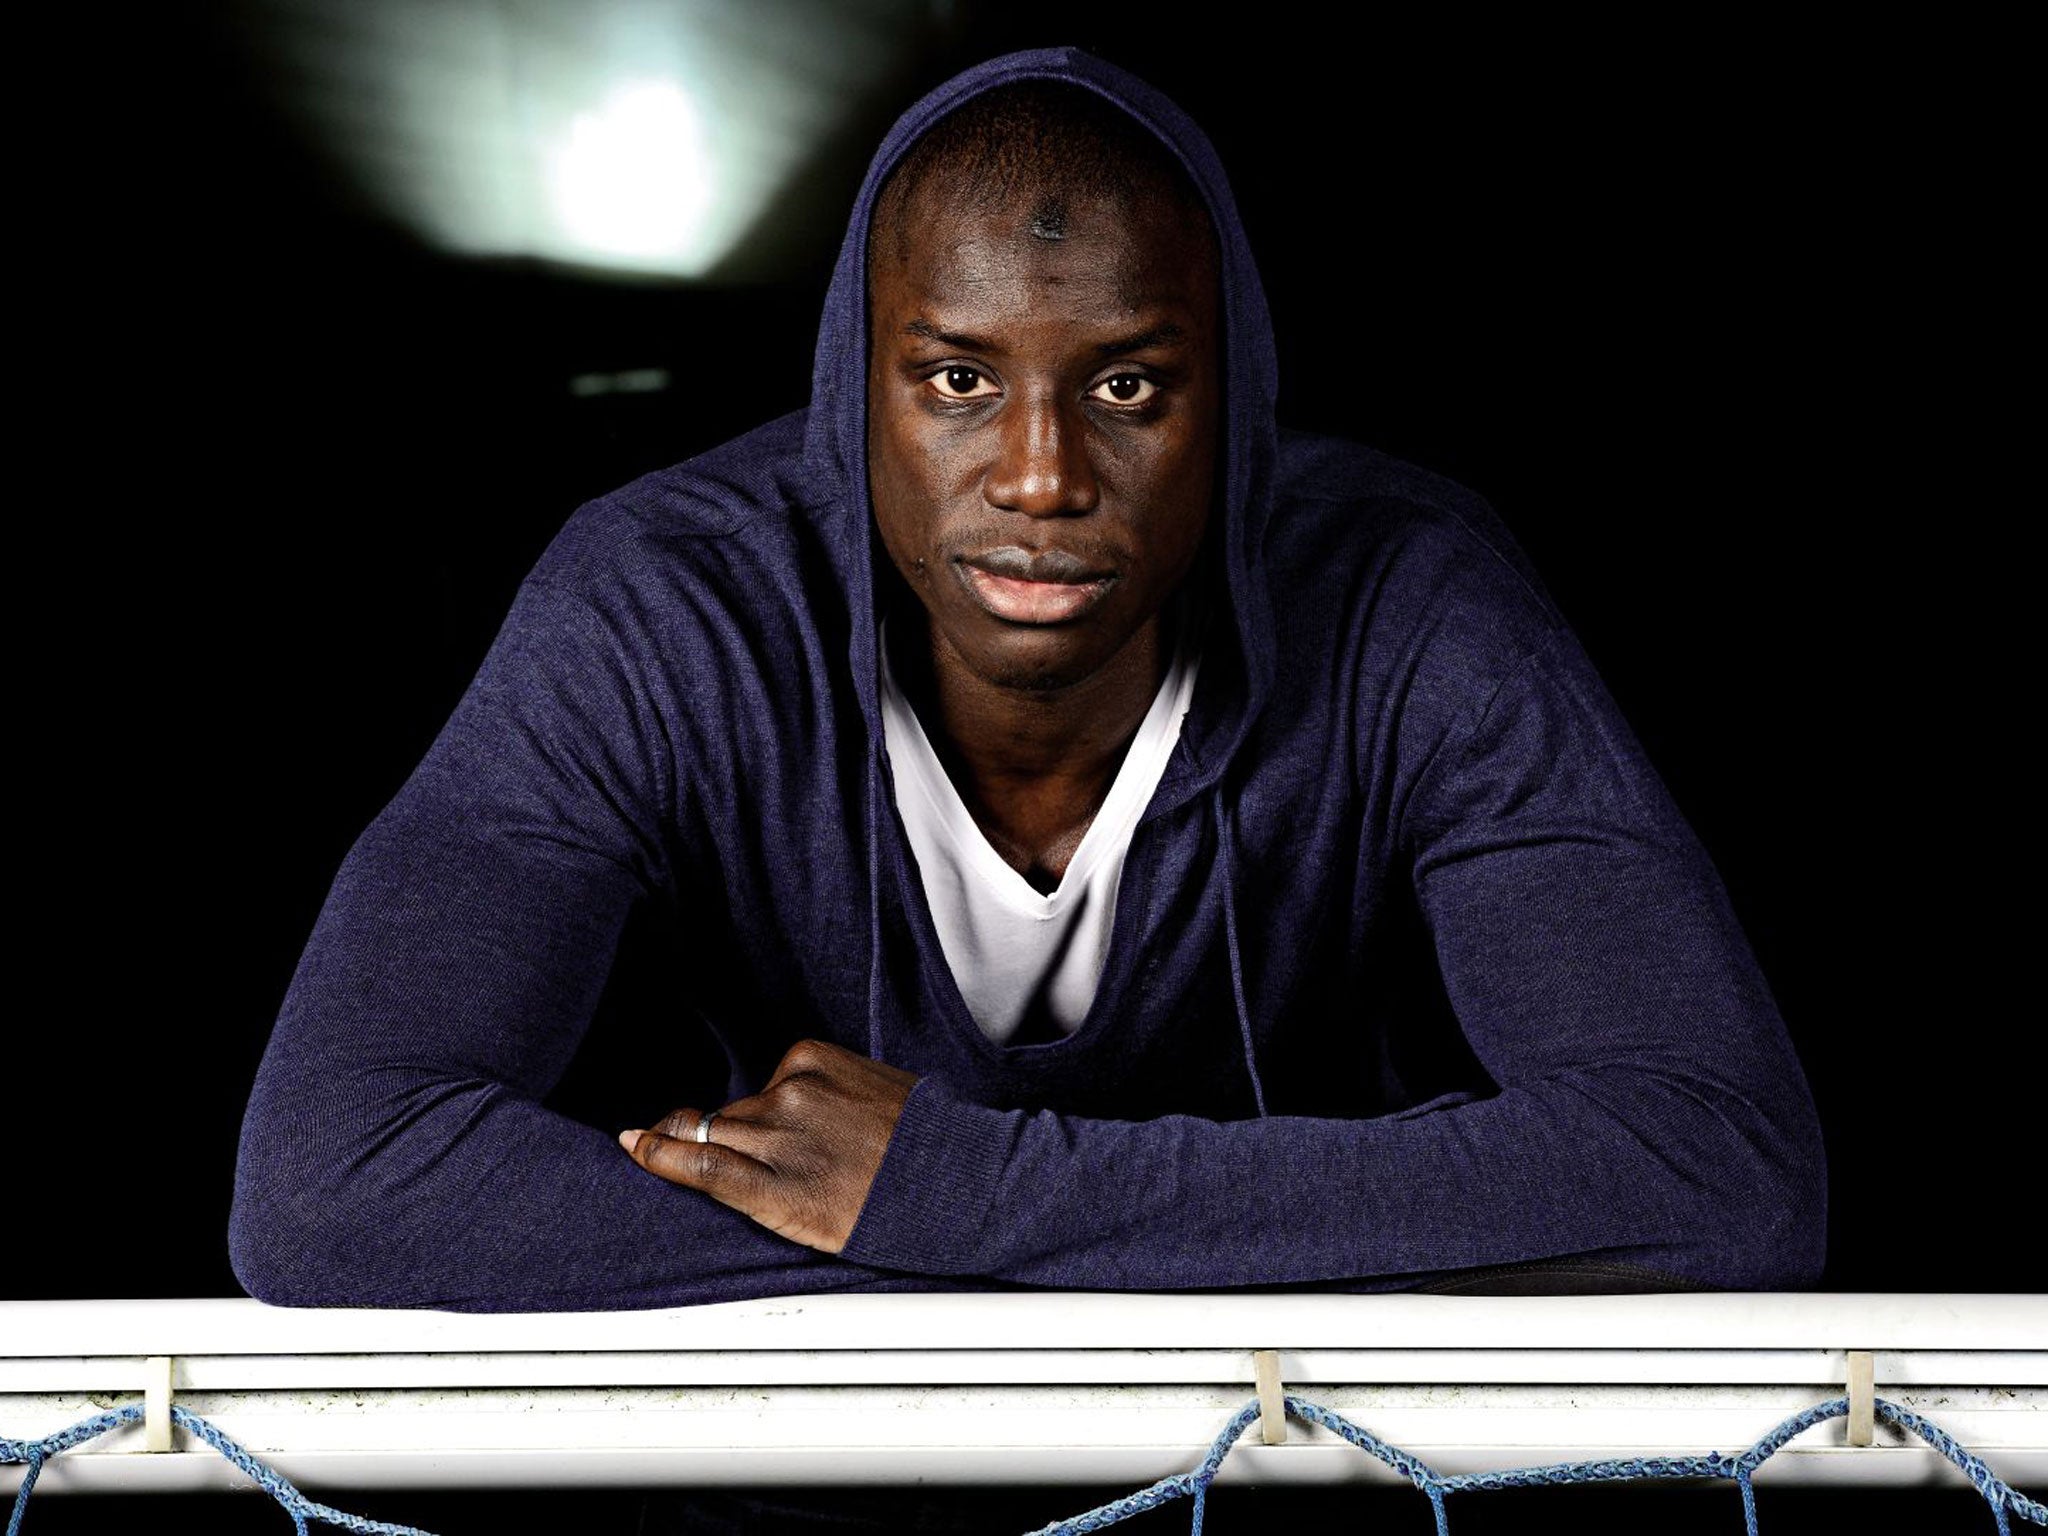 "In France they look at you like you’re something weird. I am just a human being," says Demba Ba